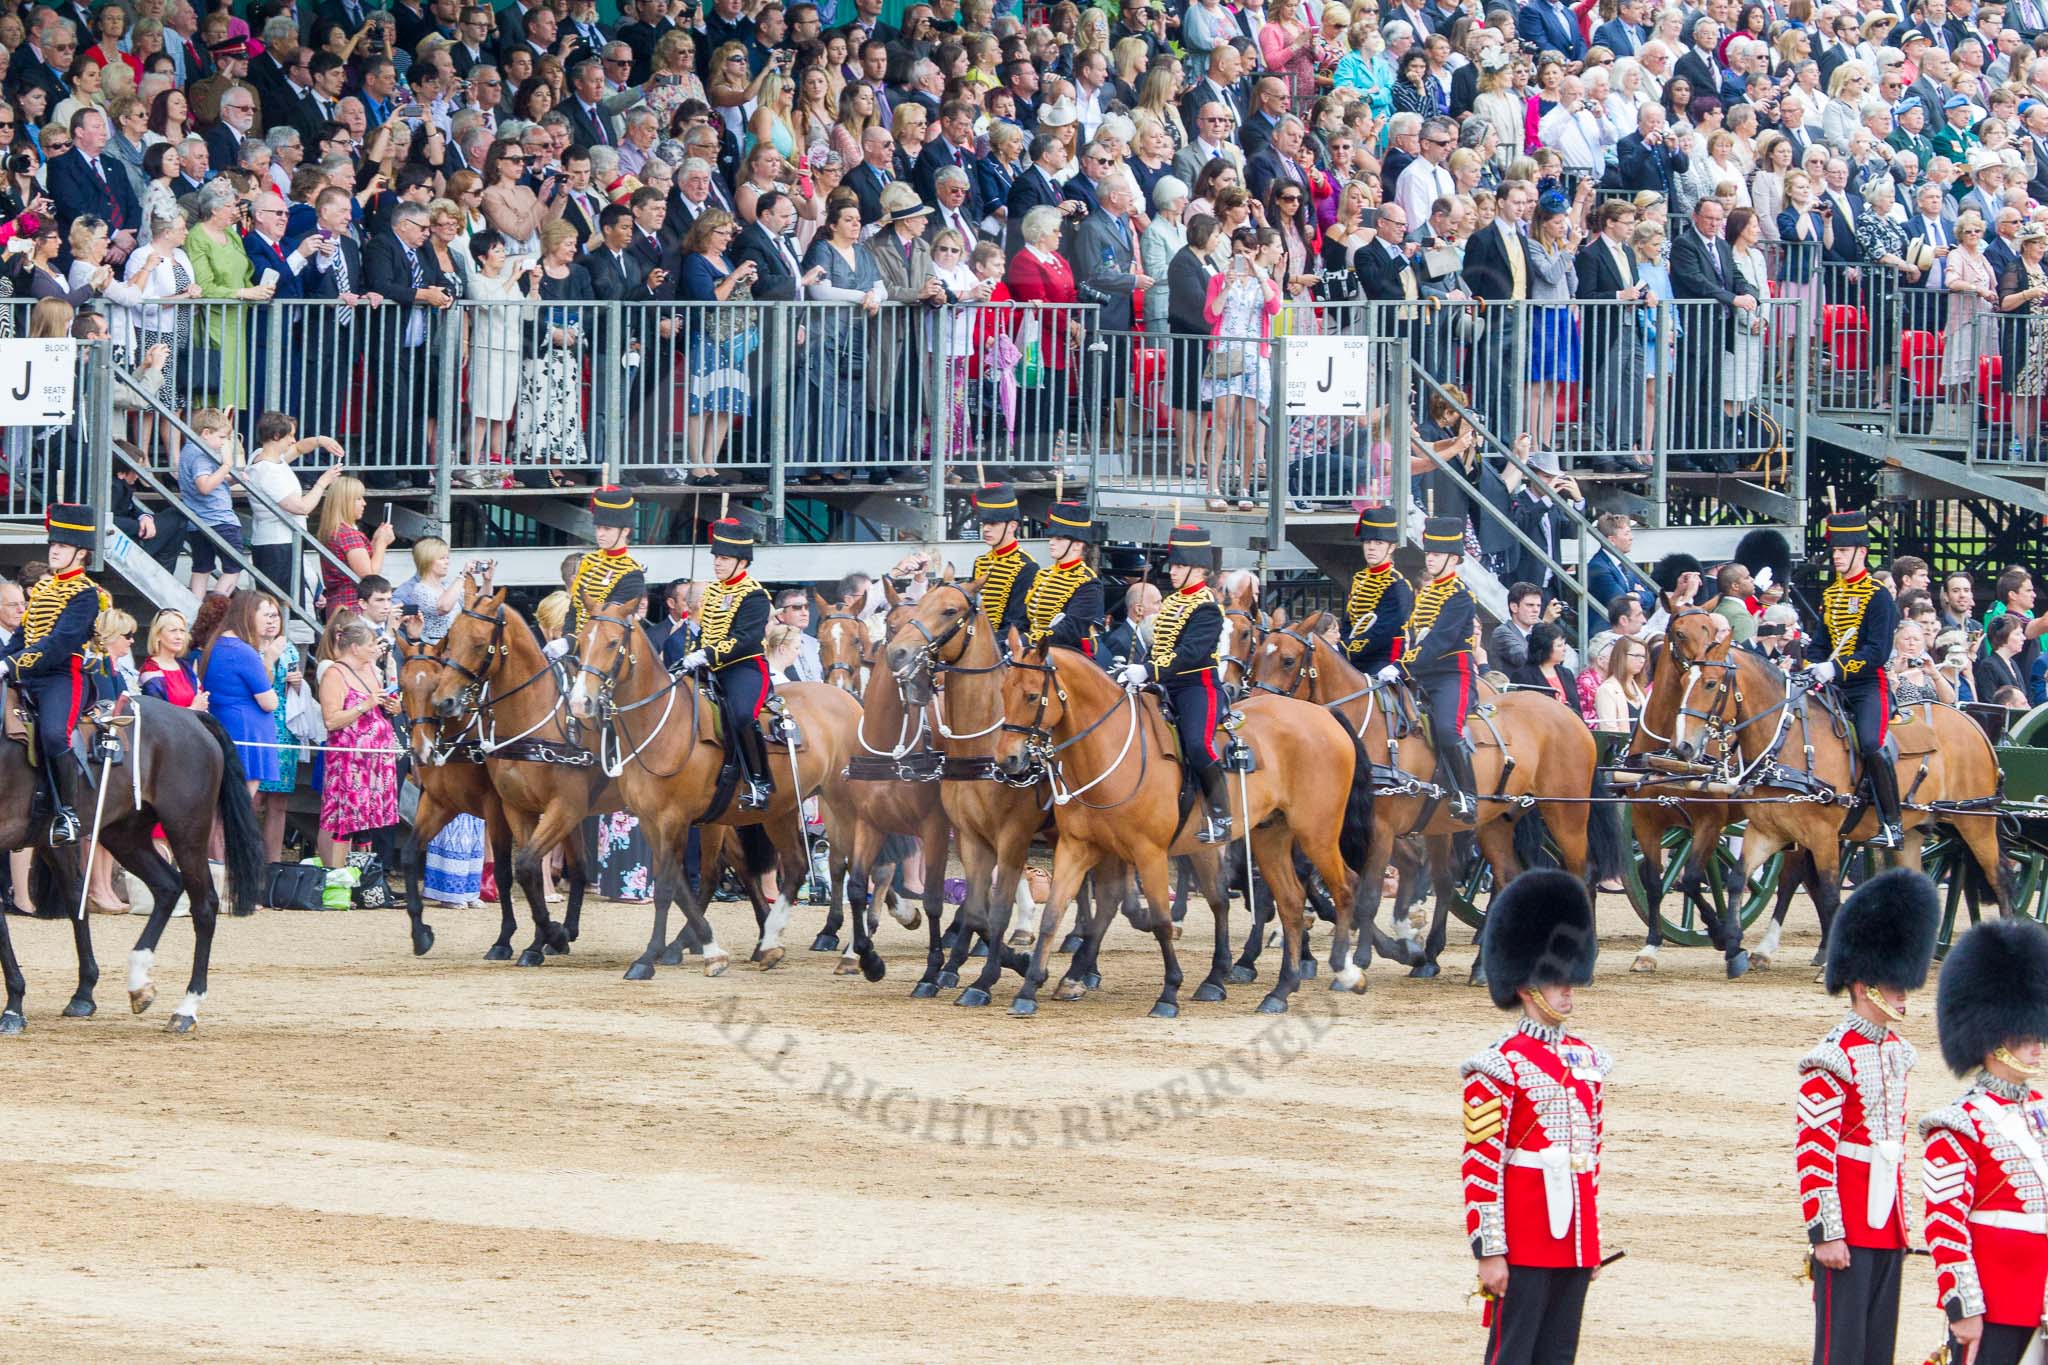 Trooping the Colour 2014.
Horse Guards Parade, Westminster,
London SW1A,

United Kingdom,
on 14 June 2014 at 11:55, image #737